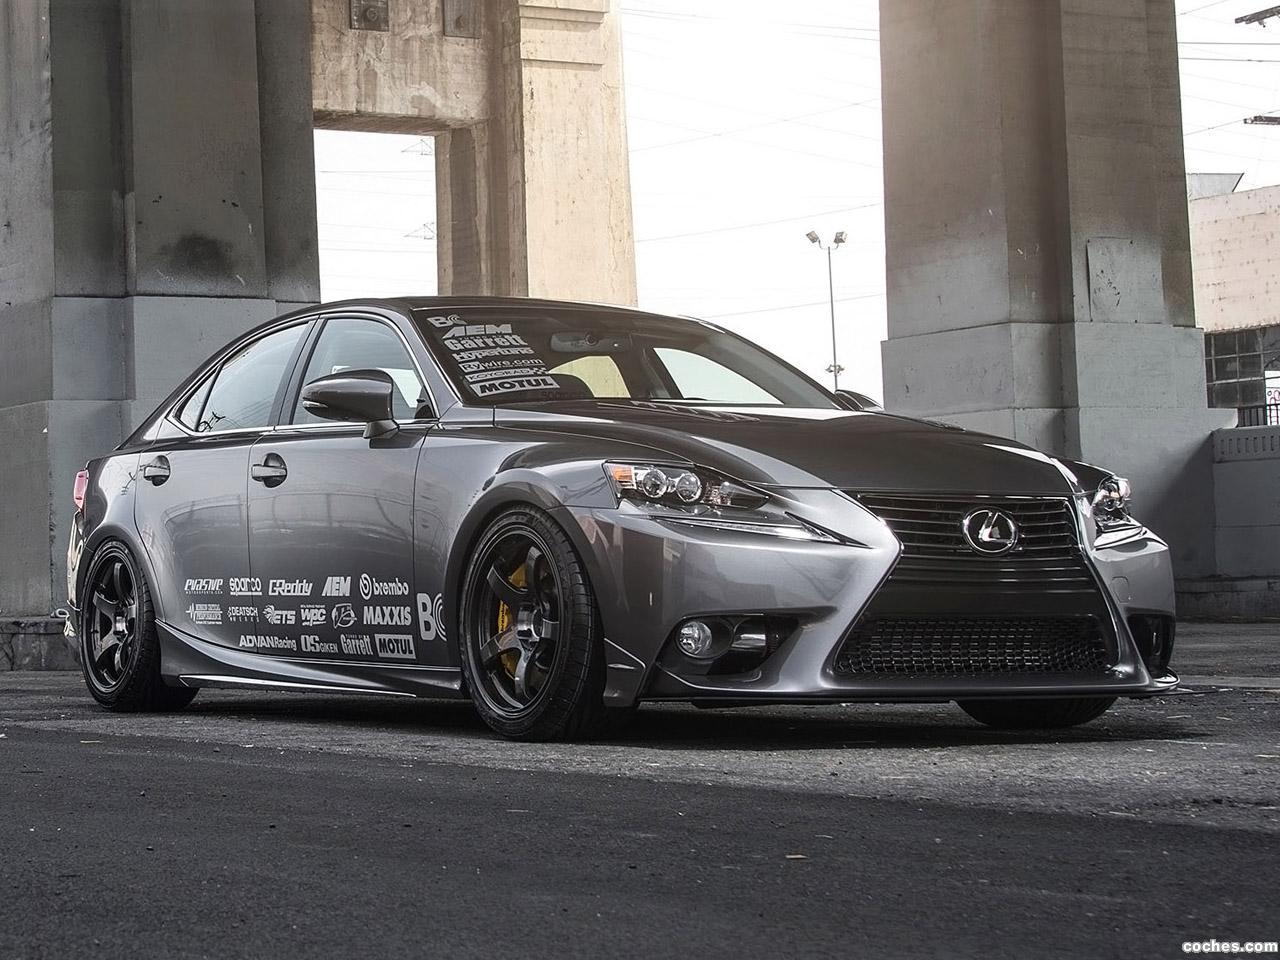 lexus_is-340-by-philip-chase-2013_r5